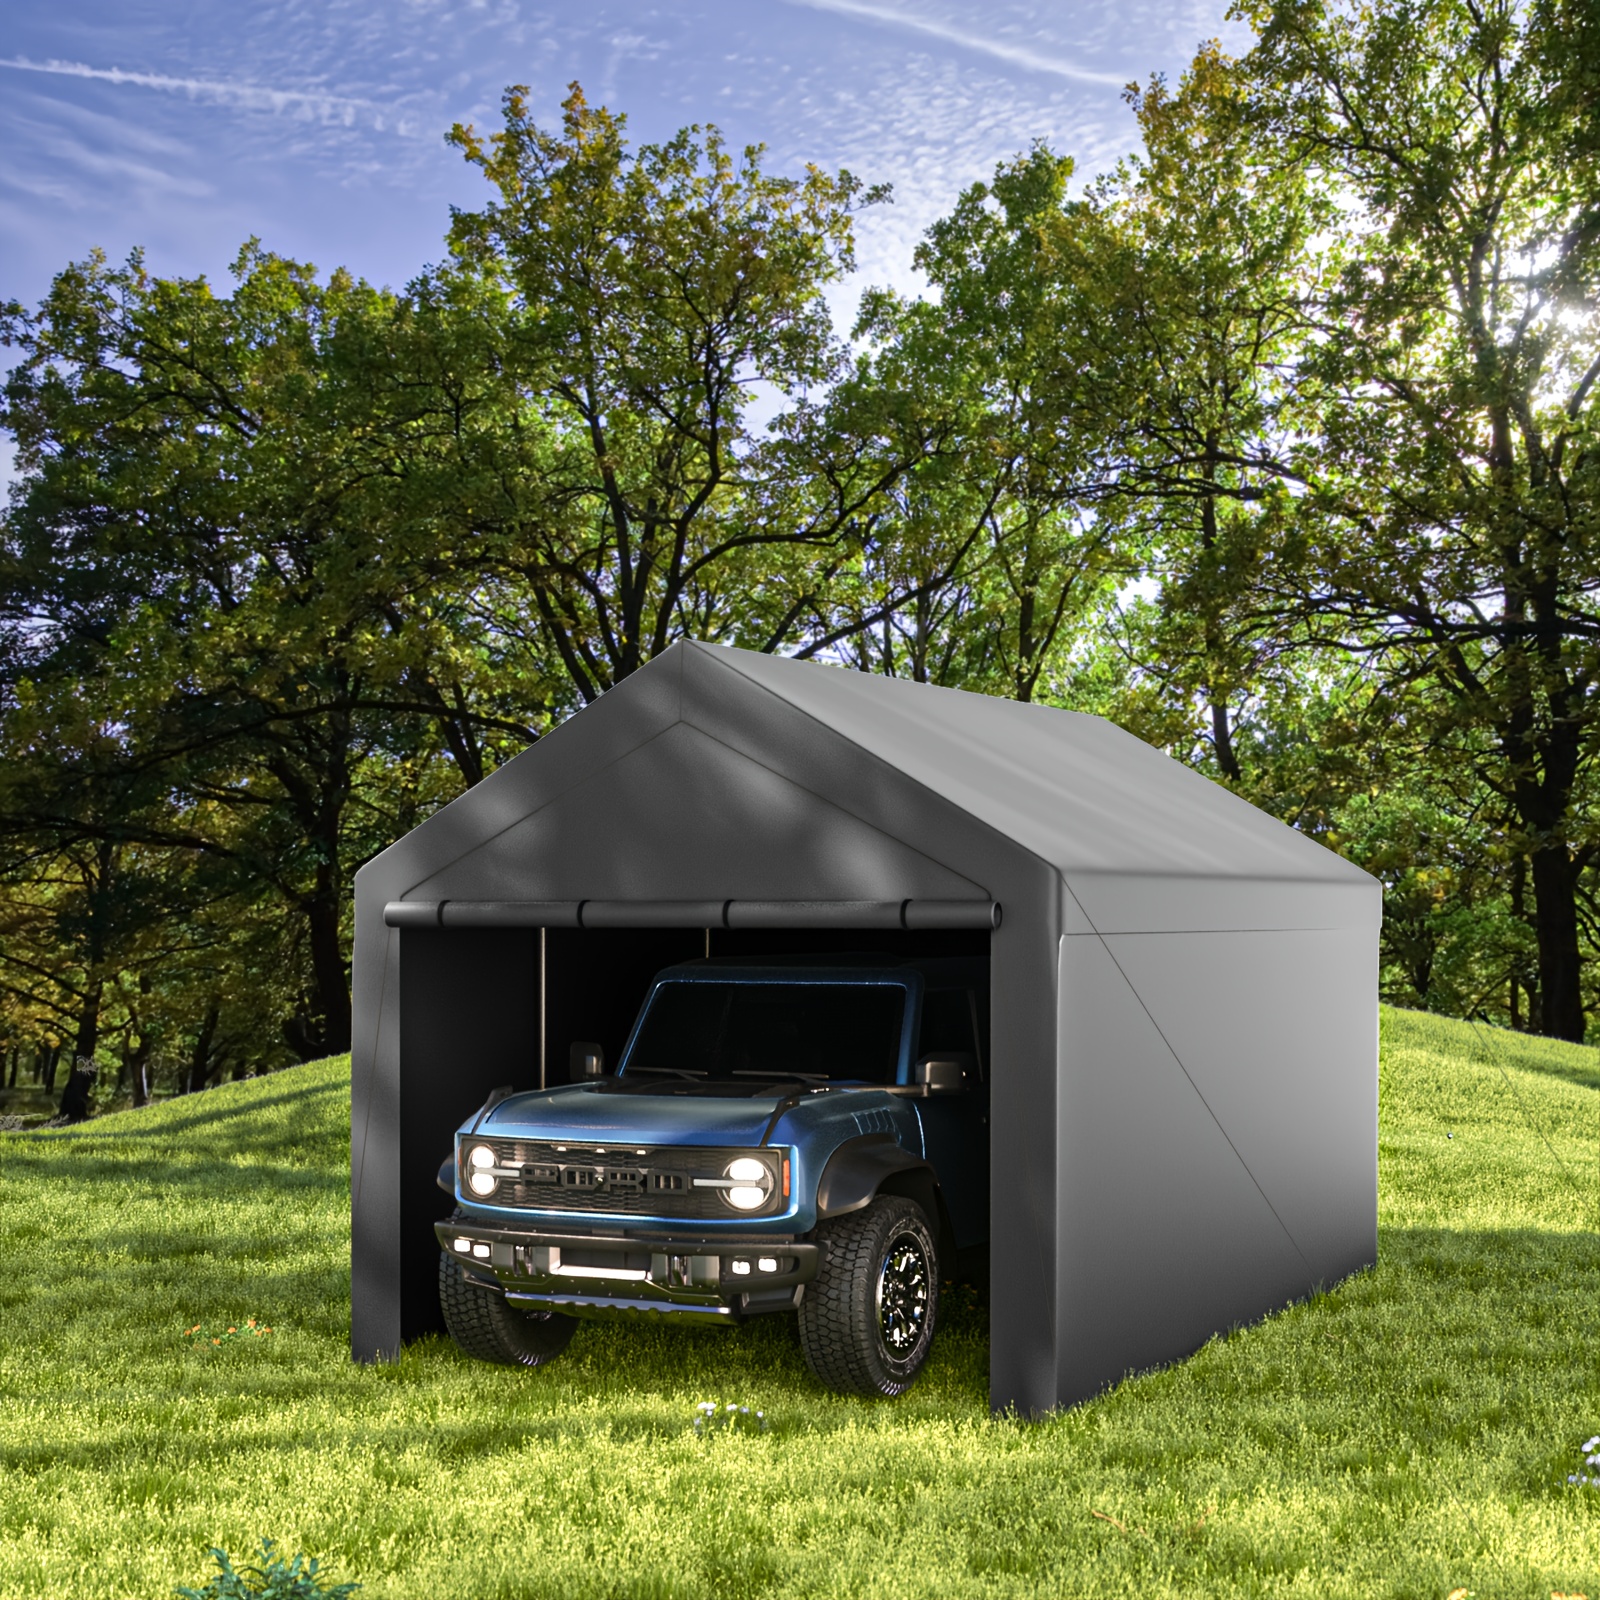 

10x20ft Heavy Duty Carport With Removable Sidewalls, All Weather Carport Garage Party Tent Large Outdoor Canopy Storage Shed For Auto, Truck, Boat, Party (grey)